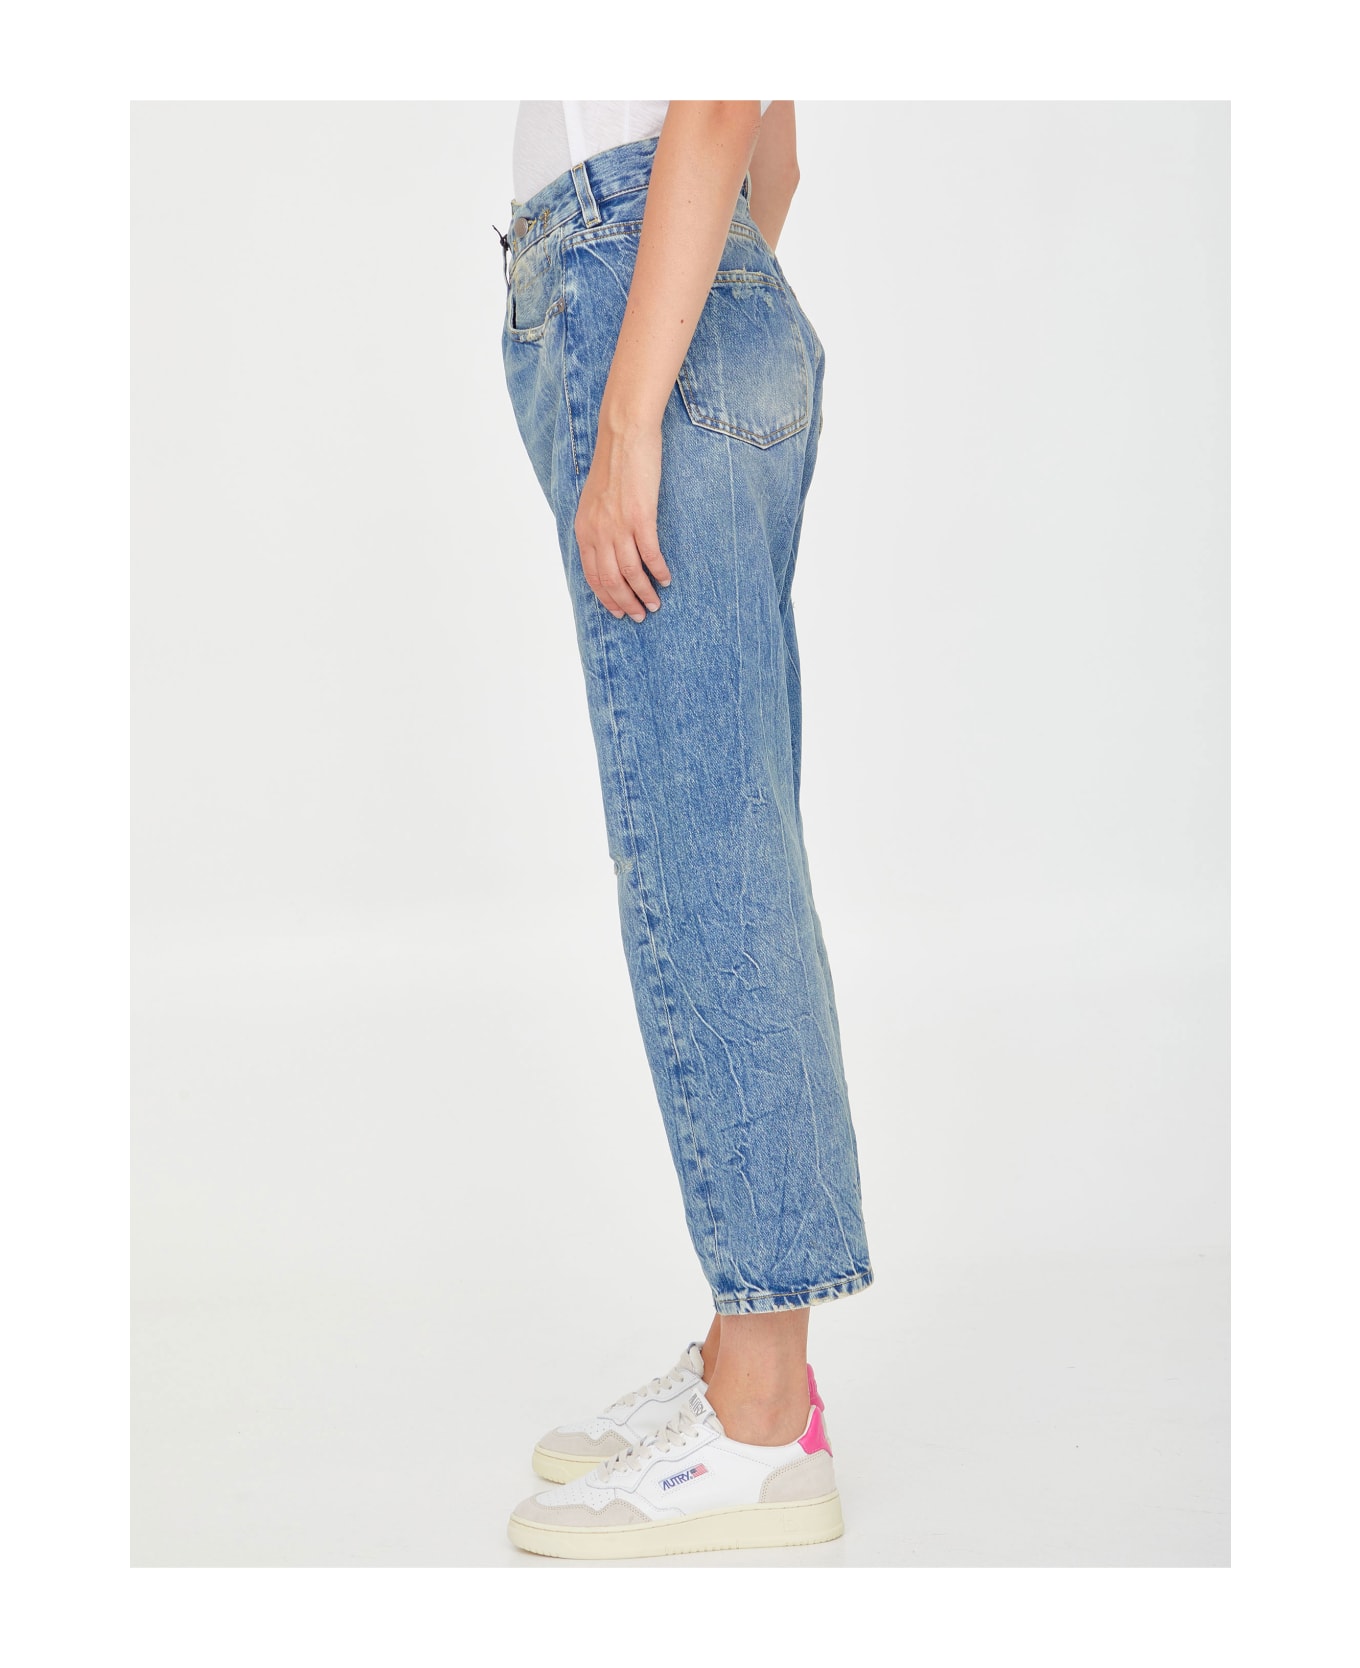 R13 Kelly Crossover Jeans Jeans - KELLY